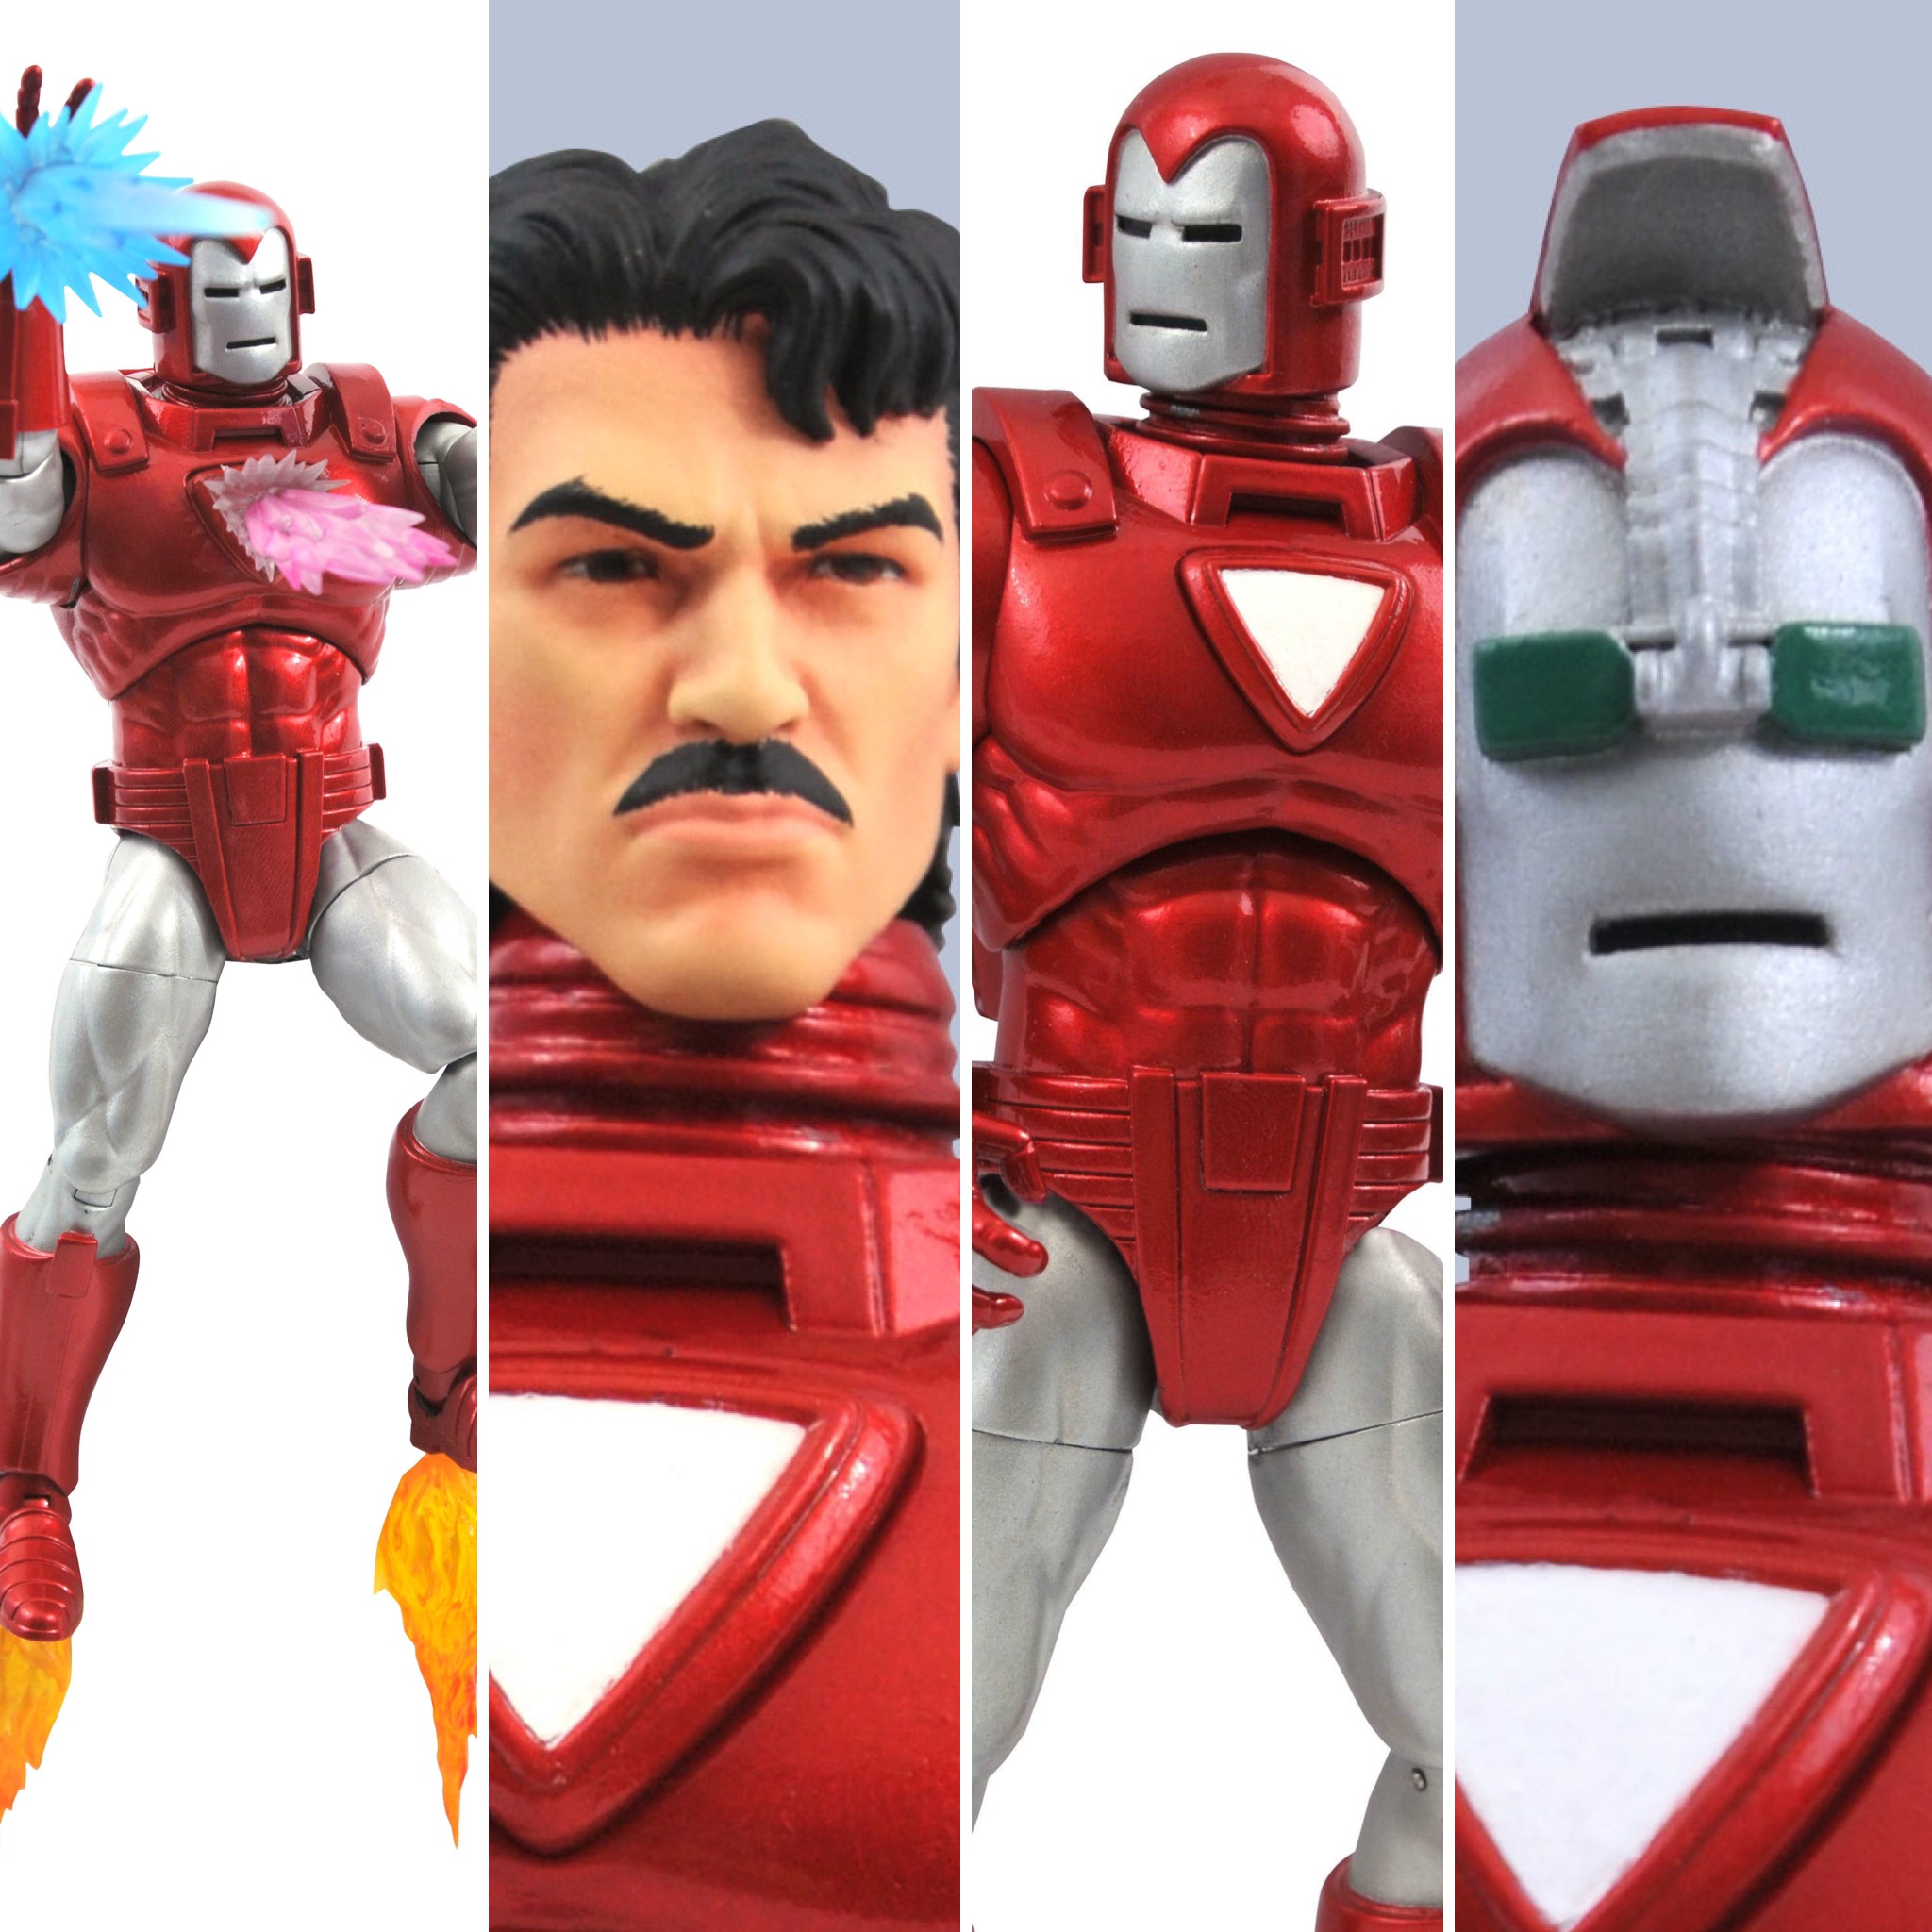 Marvel Select Silver Centurion Iron Man Figure Revealed & Up for ...